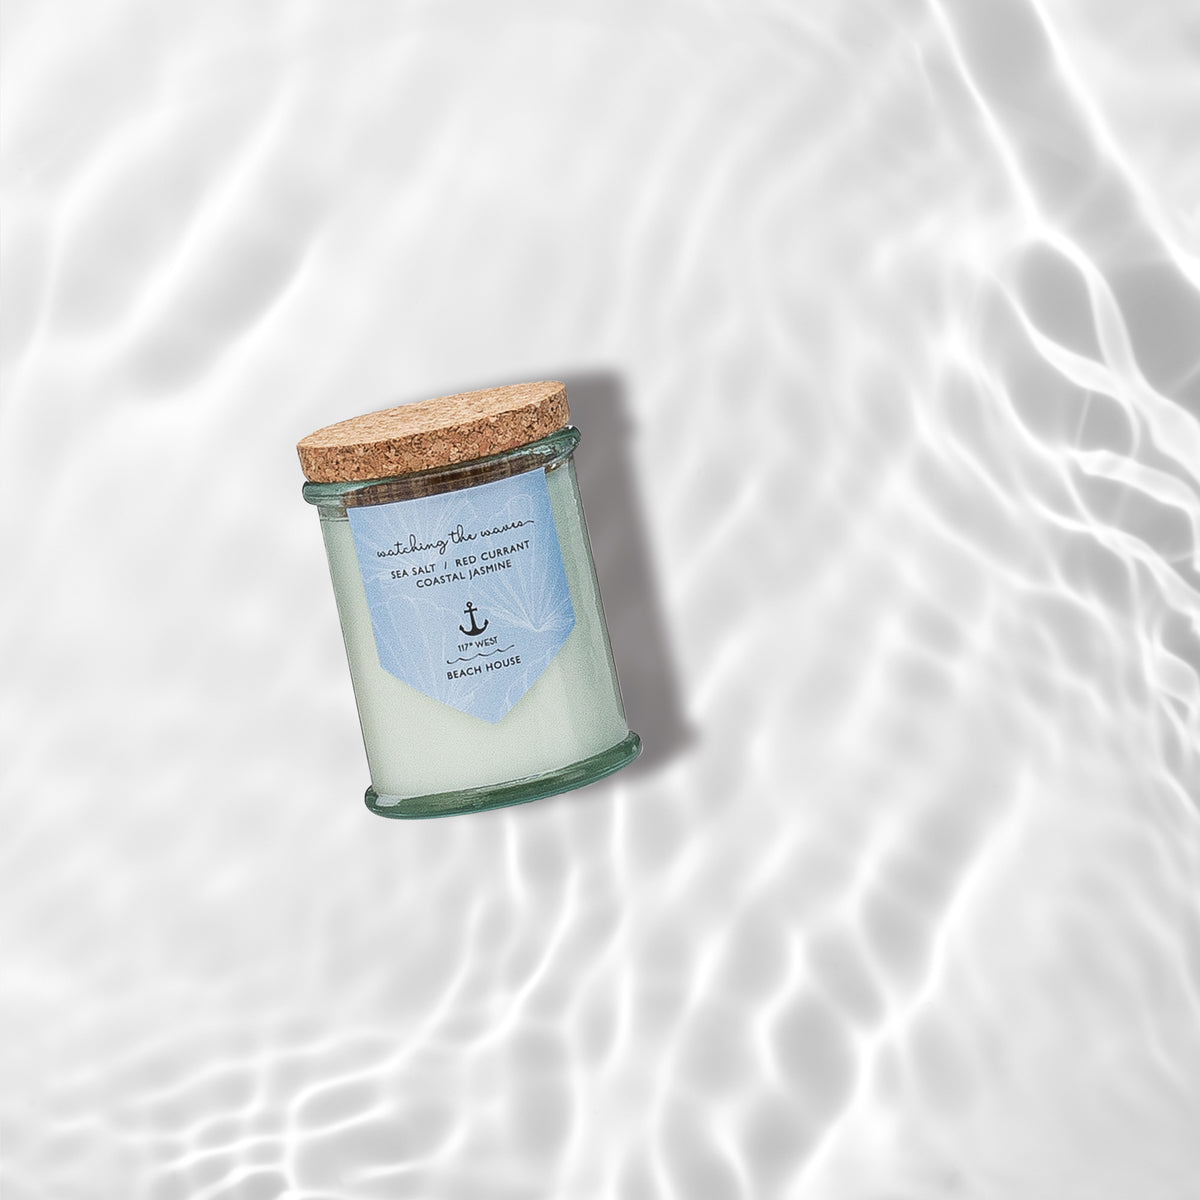 BEACH HOUSE MINI CANDLES - recycled glass and natural wax